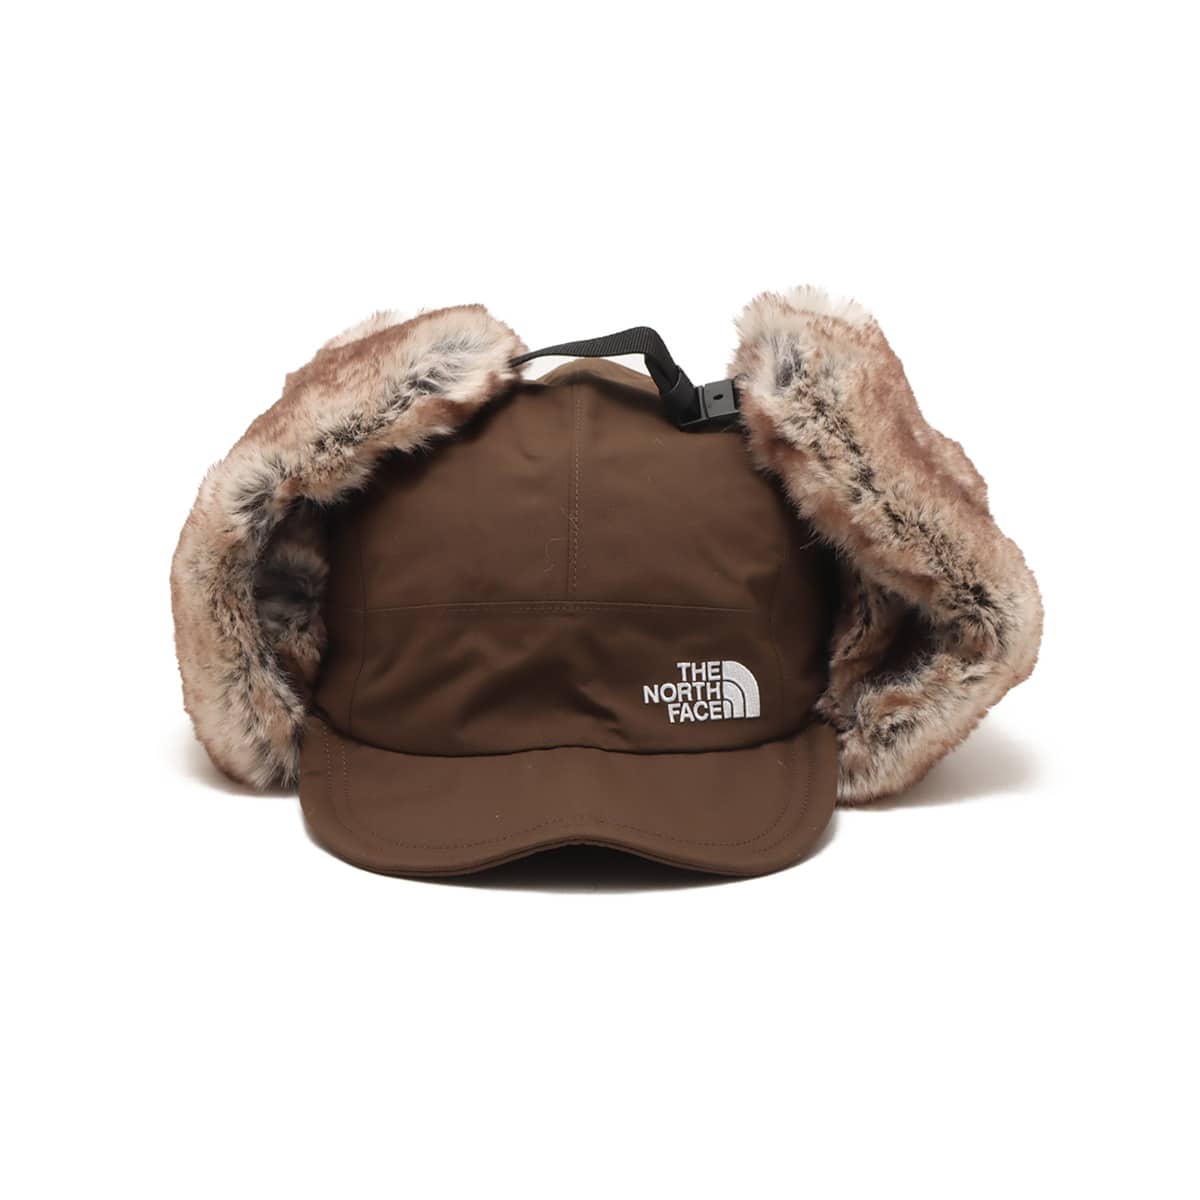 THE NORTH FACE FRONTIER CAP Sブラウン 23FW-I